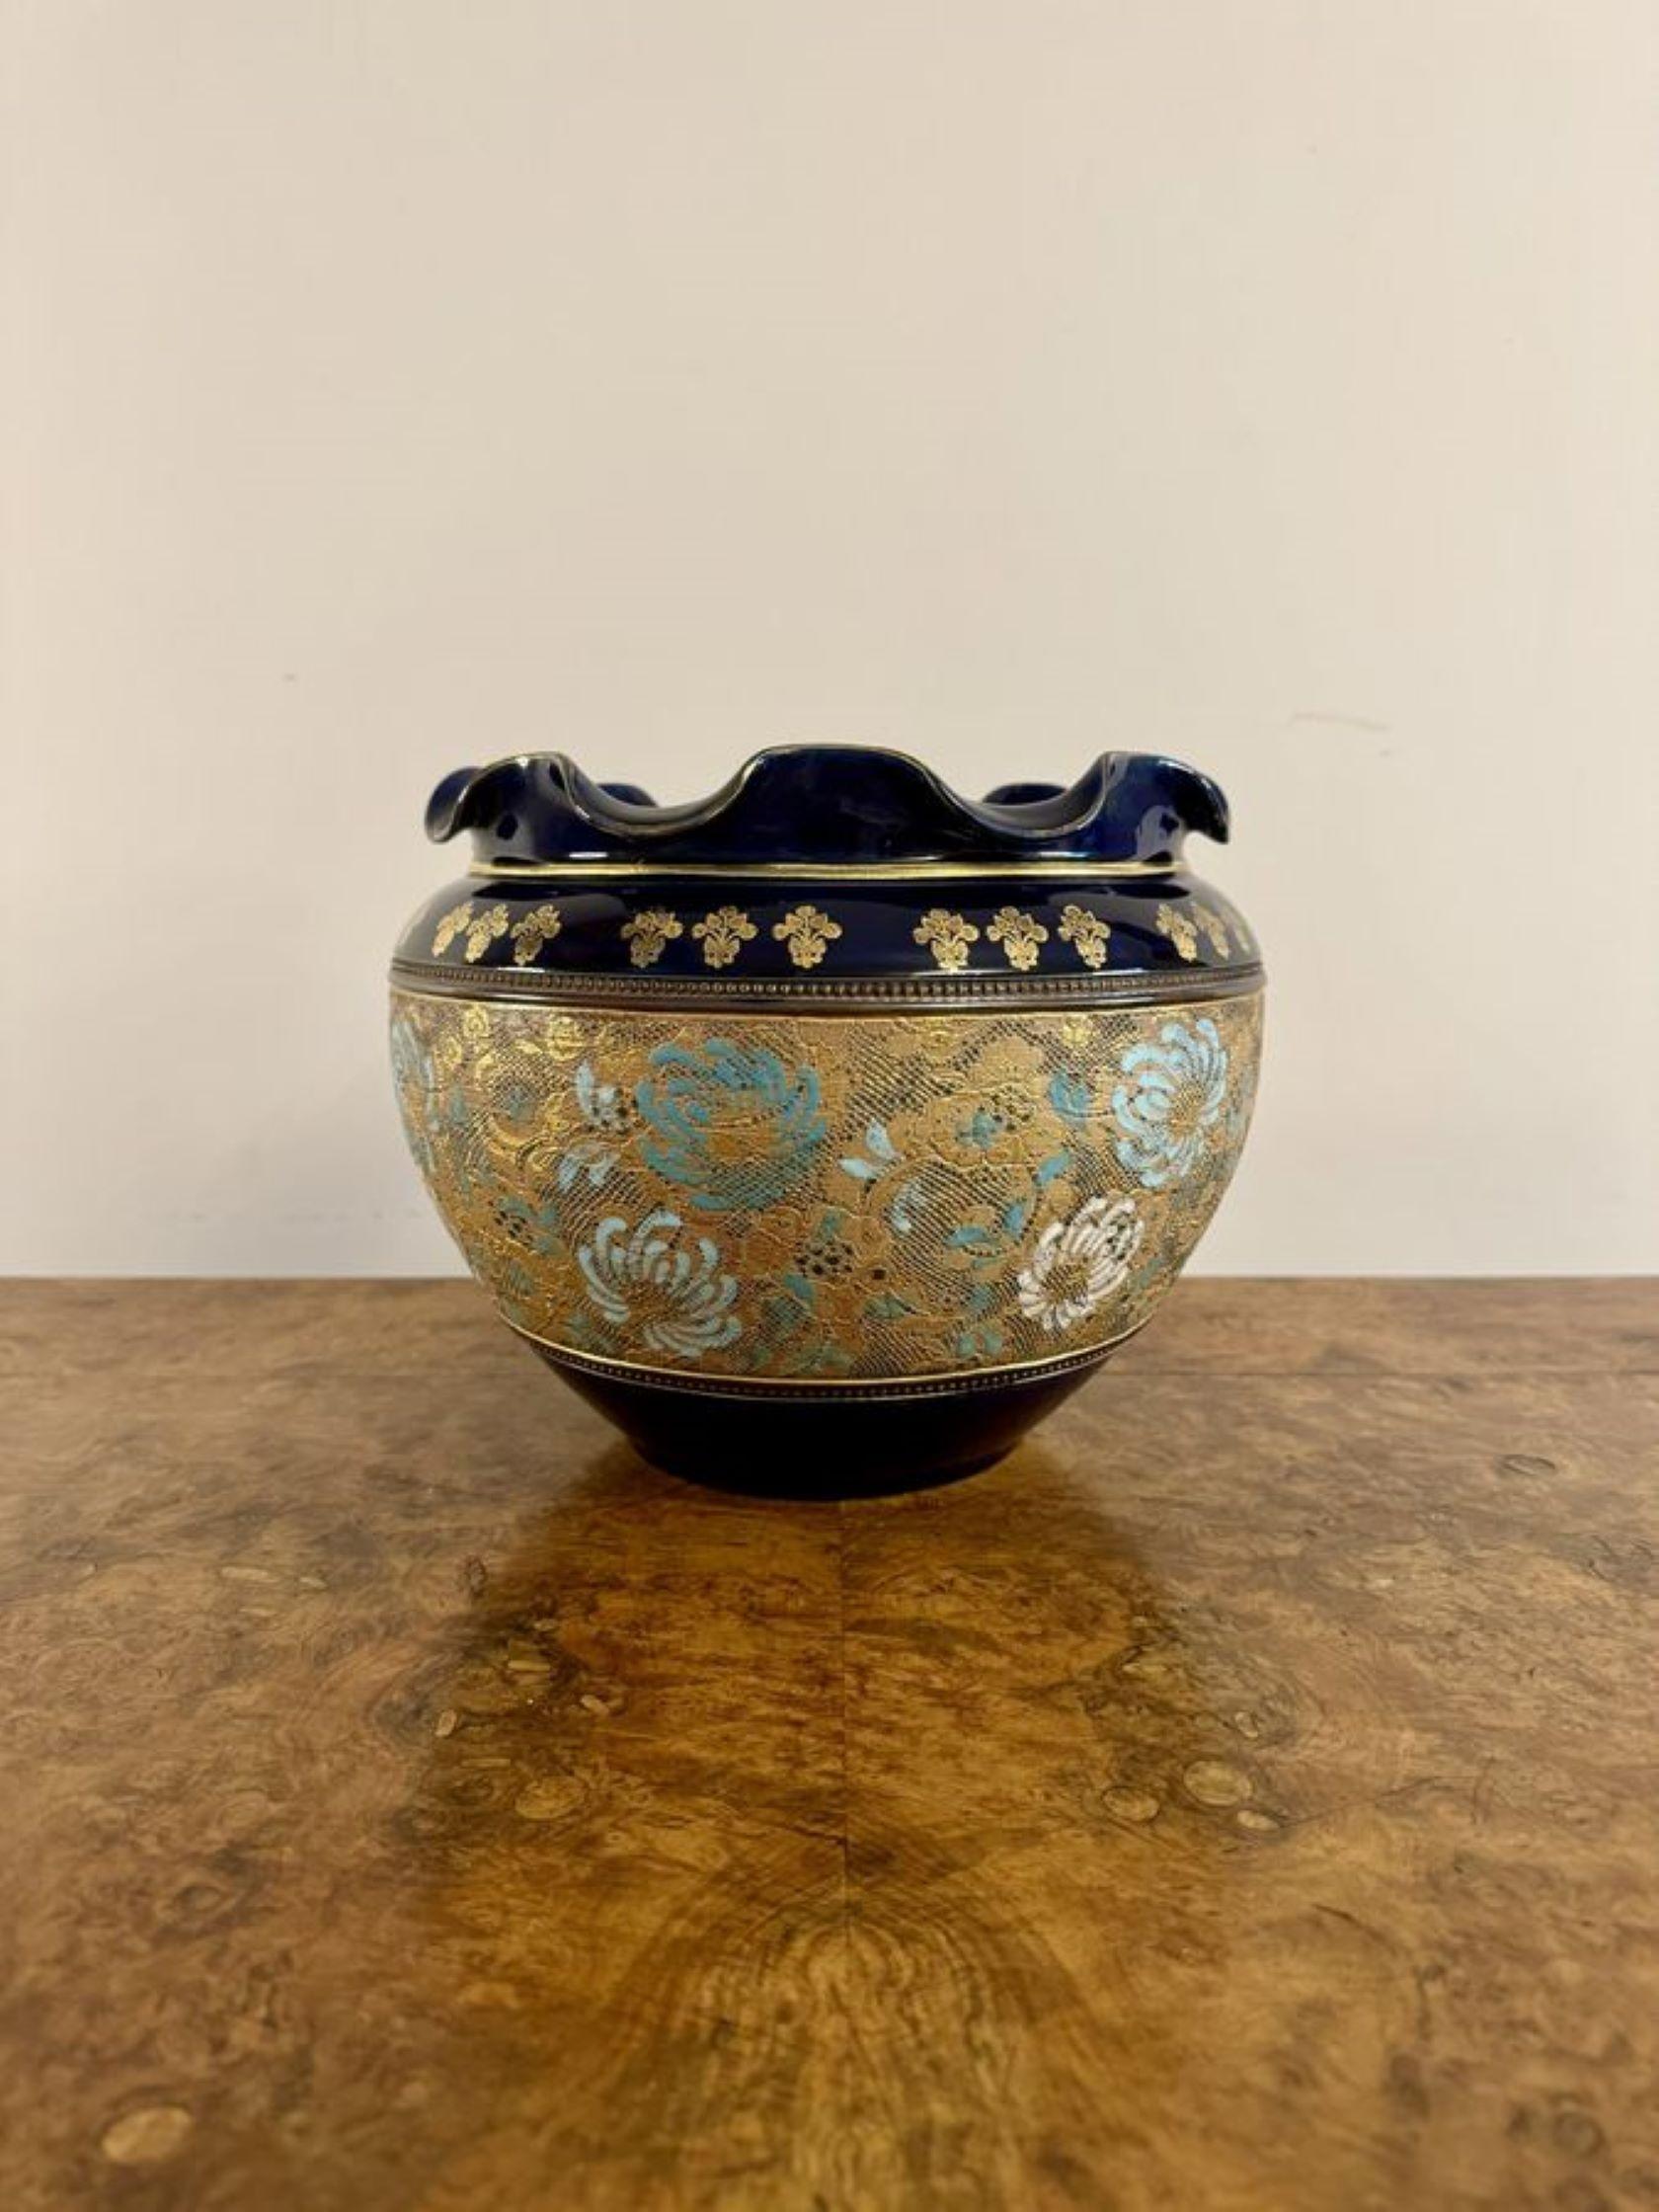 Excellent quality antique Royal Doulton jardiniere having a quality antique Royal Doulton jardiniere with a blue wavy shaped top with gold gilded decoration, having a centre panel on a gold ground with pretty floral decoration in stunning gold,